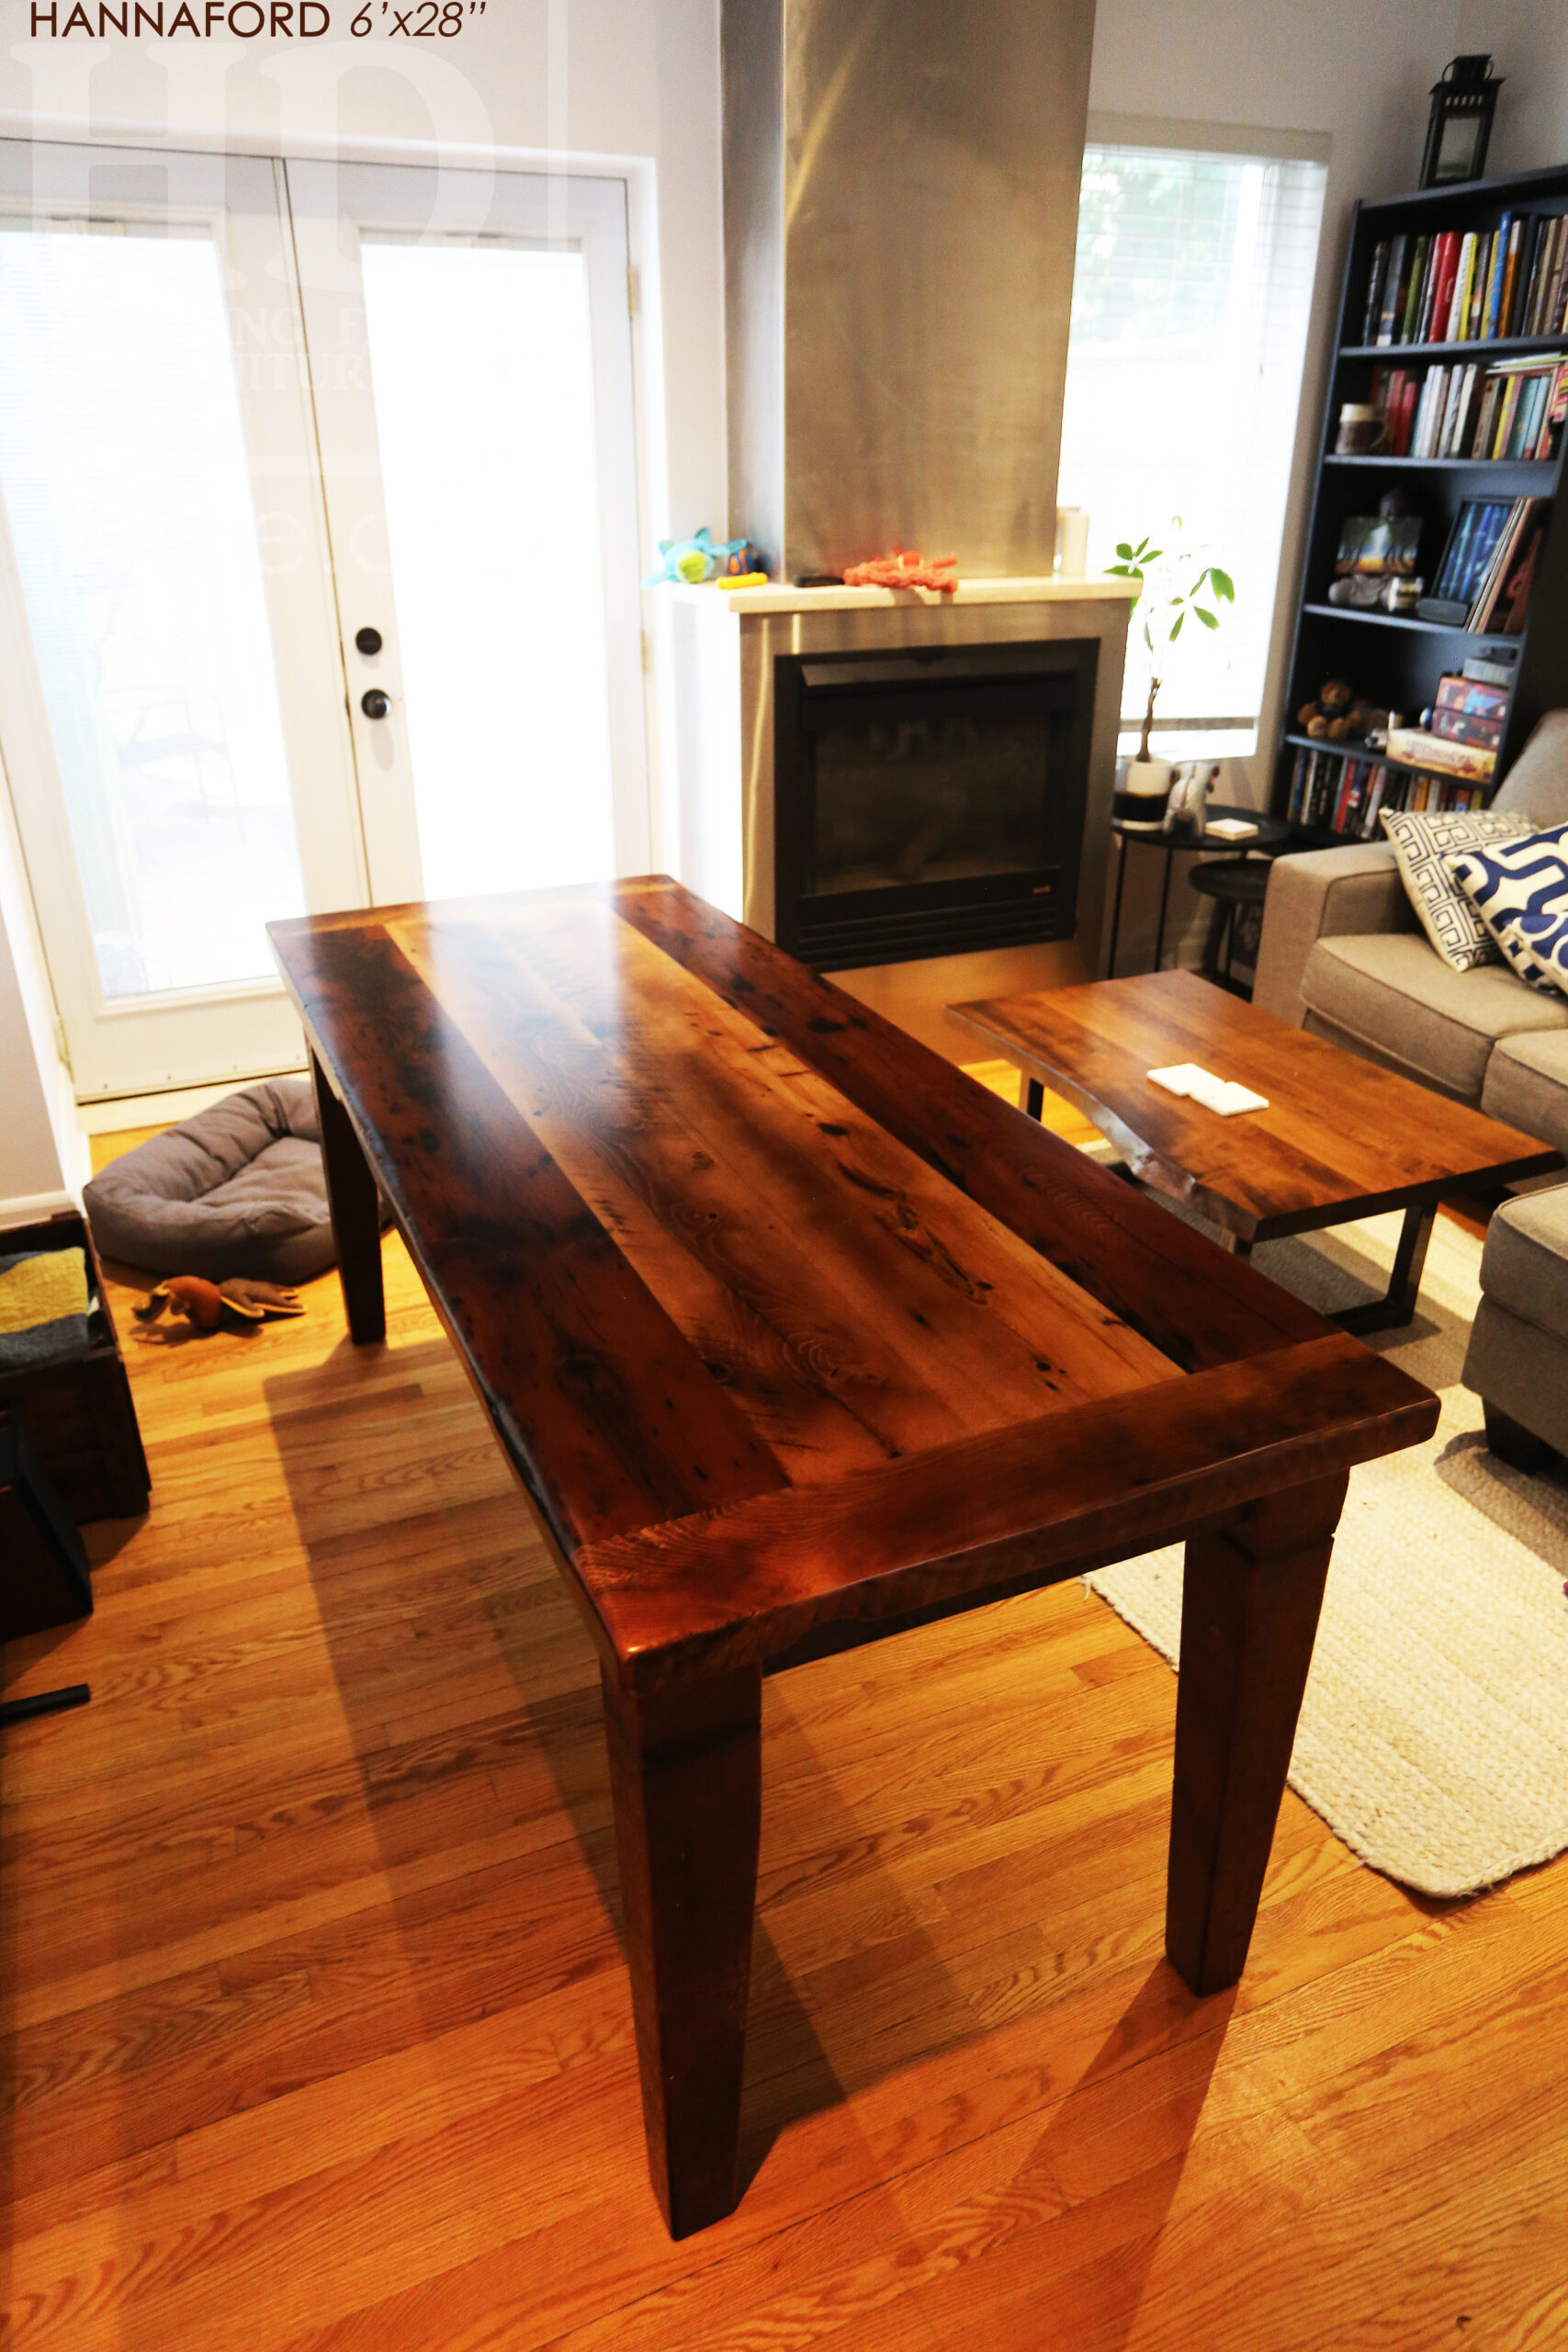 6’ Ontario Barnwood Harvest Table we made for a Toronto, Ontario Home – 28” wide – Harvest Base / Tapered with a Notch Windbrace Beam Legs - Old Growth Hemlock Threshing Floor Construction - Original edges & distressing maintained – Bread Edge Board Ends – Premium epoxy + satin polyurethane finish - www.table.ca